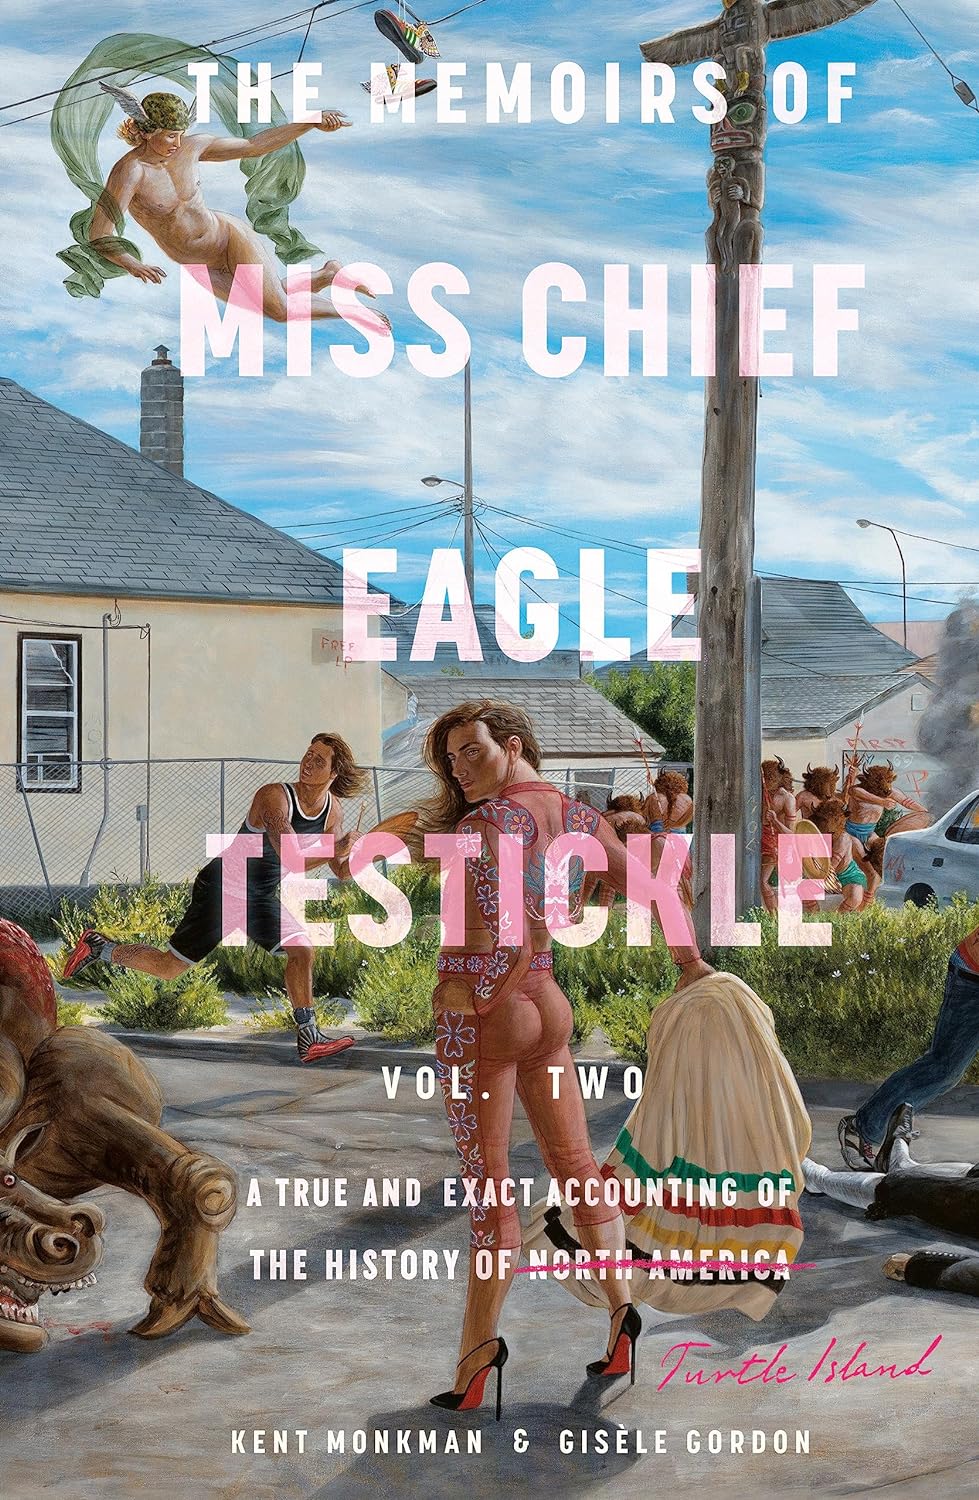 The Memoirs of Miss Chief Eagle Testickle: Vol. 2: A True and Exact Accounting of the History of Turtle Island by Kent Monkman & Gisèle Gordon